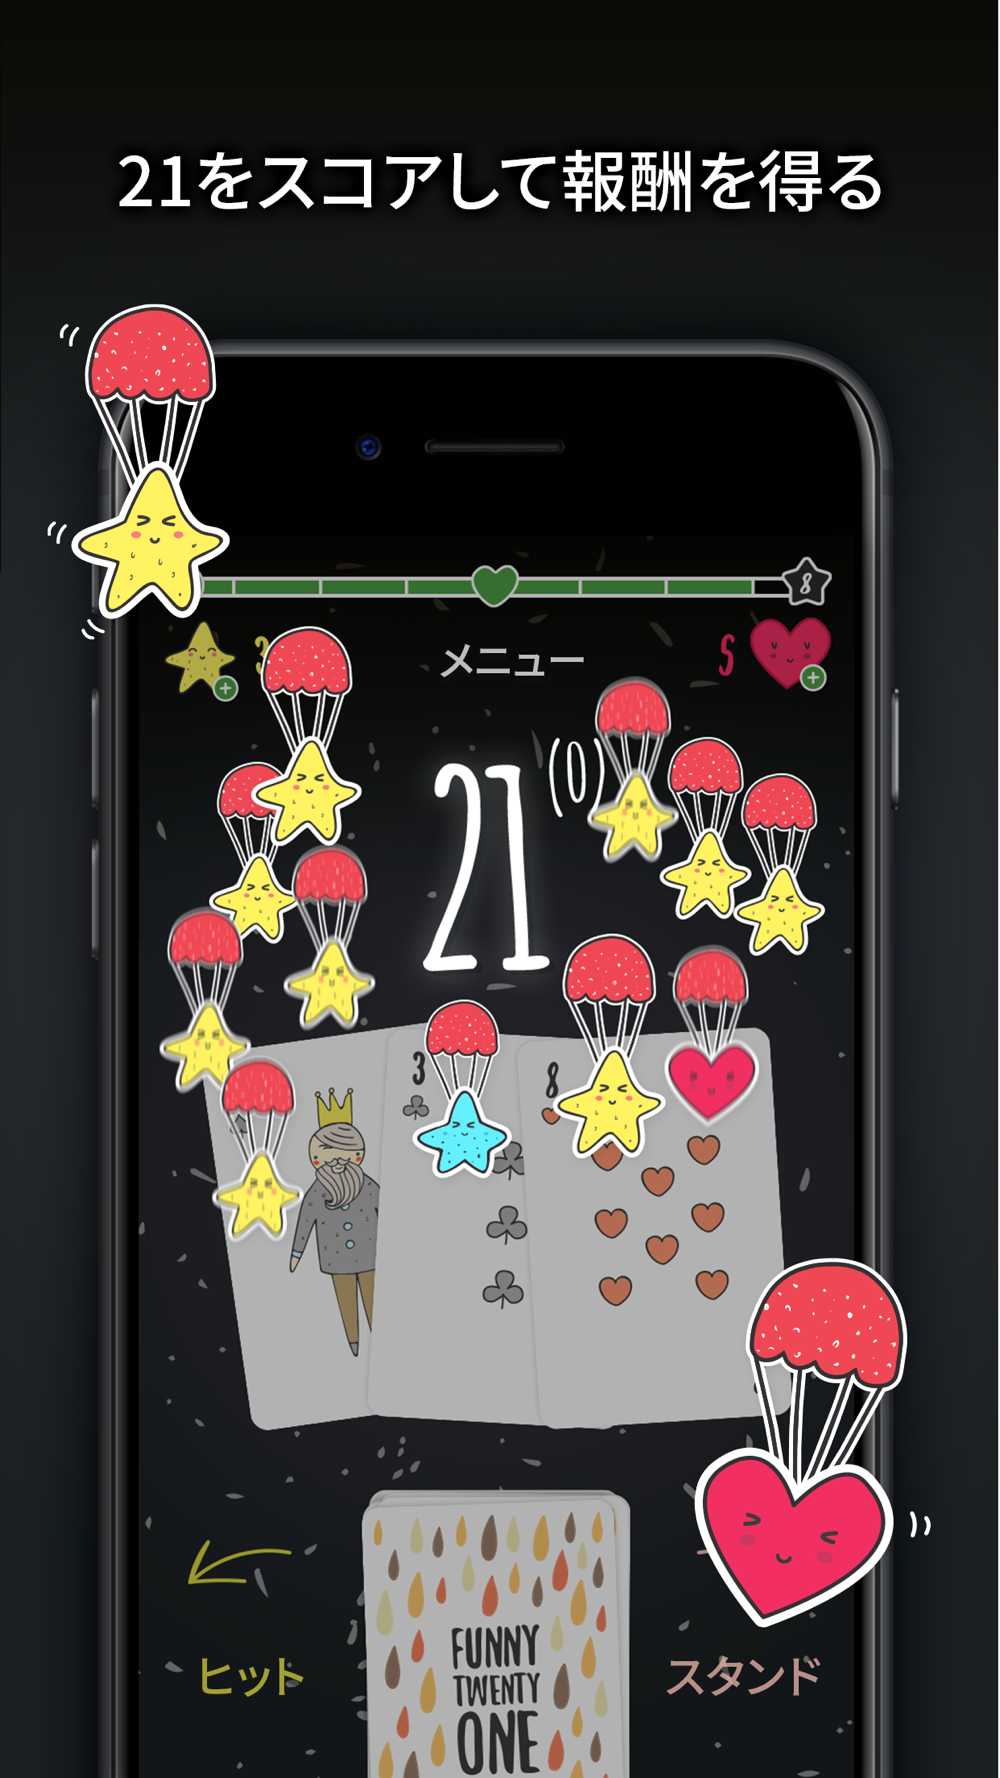 Funny 21 トランプゲーム Free Download App For Iphone Steprimo Com